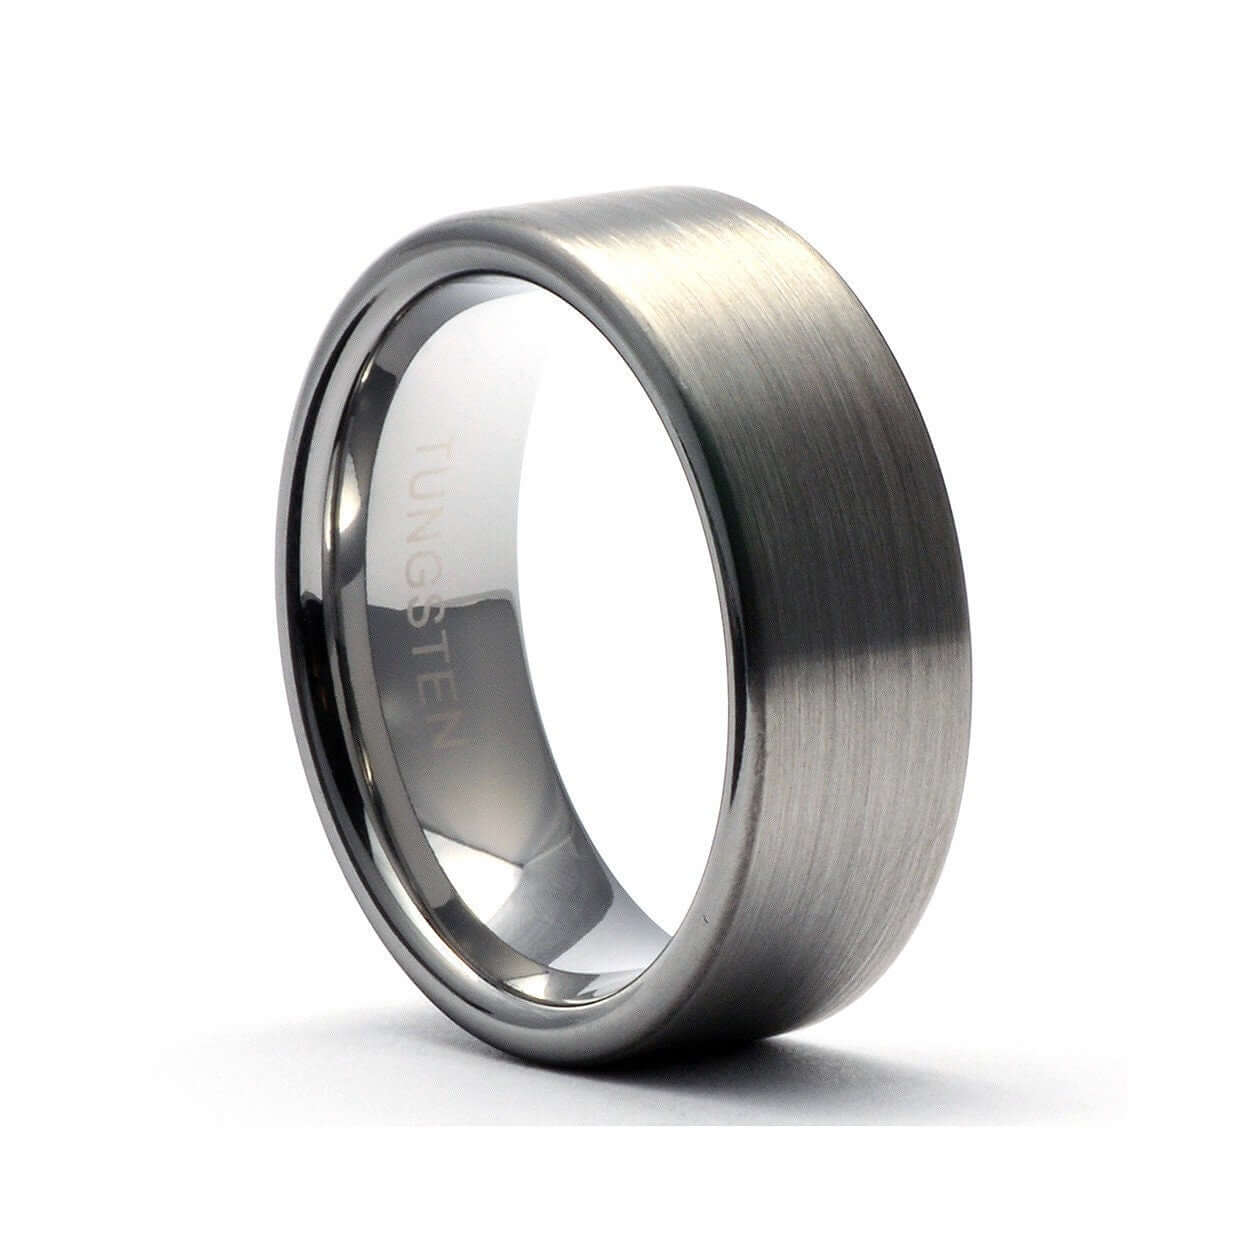 Male Wedding Band, Tungsten Carbide Ring, Tungsten Wedding Ring Matte , Mens Minimalist Ring, Tungsten, 8mm, 6mm, 4mm Ring, Parie Jewelry